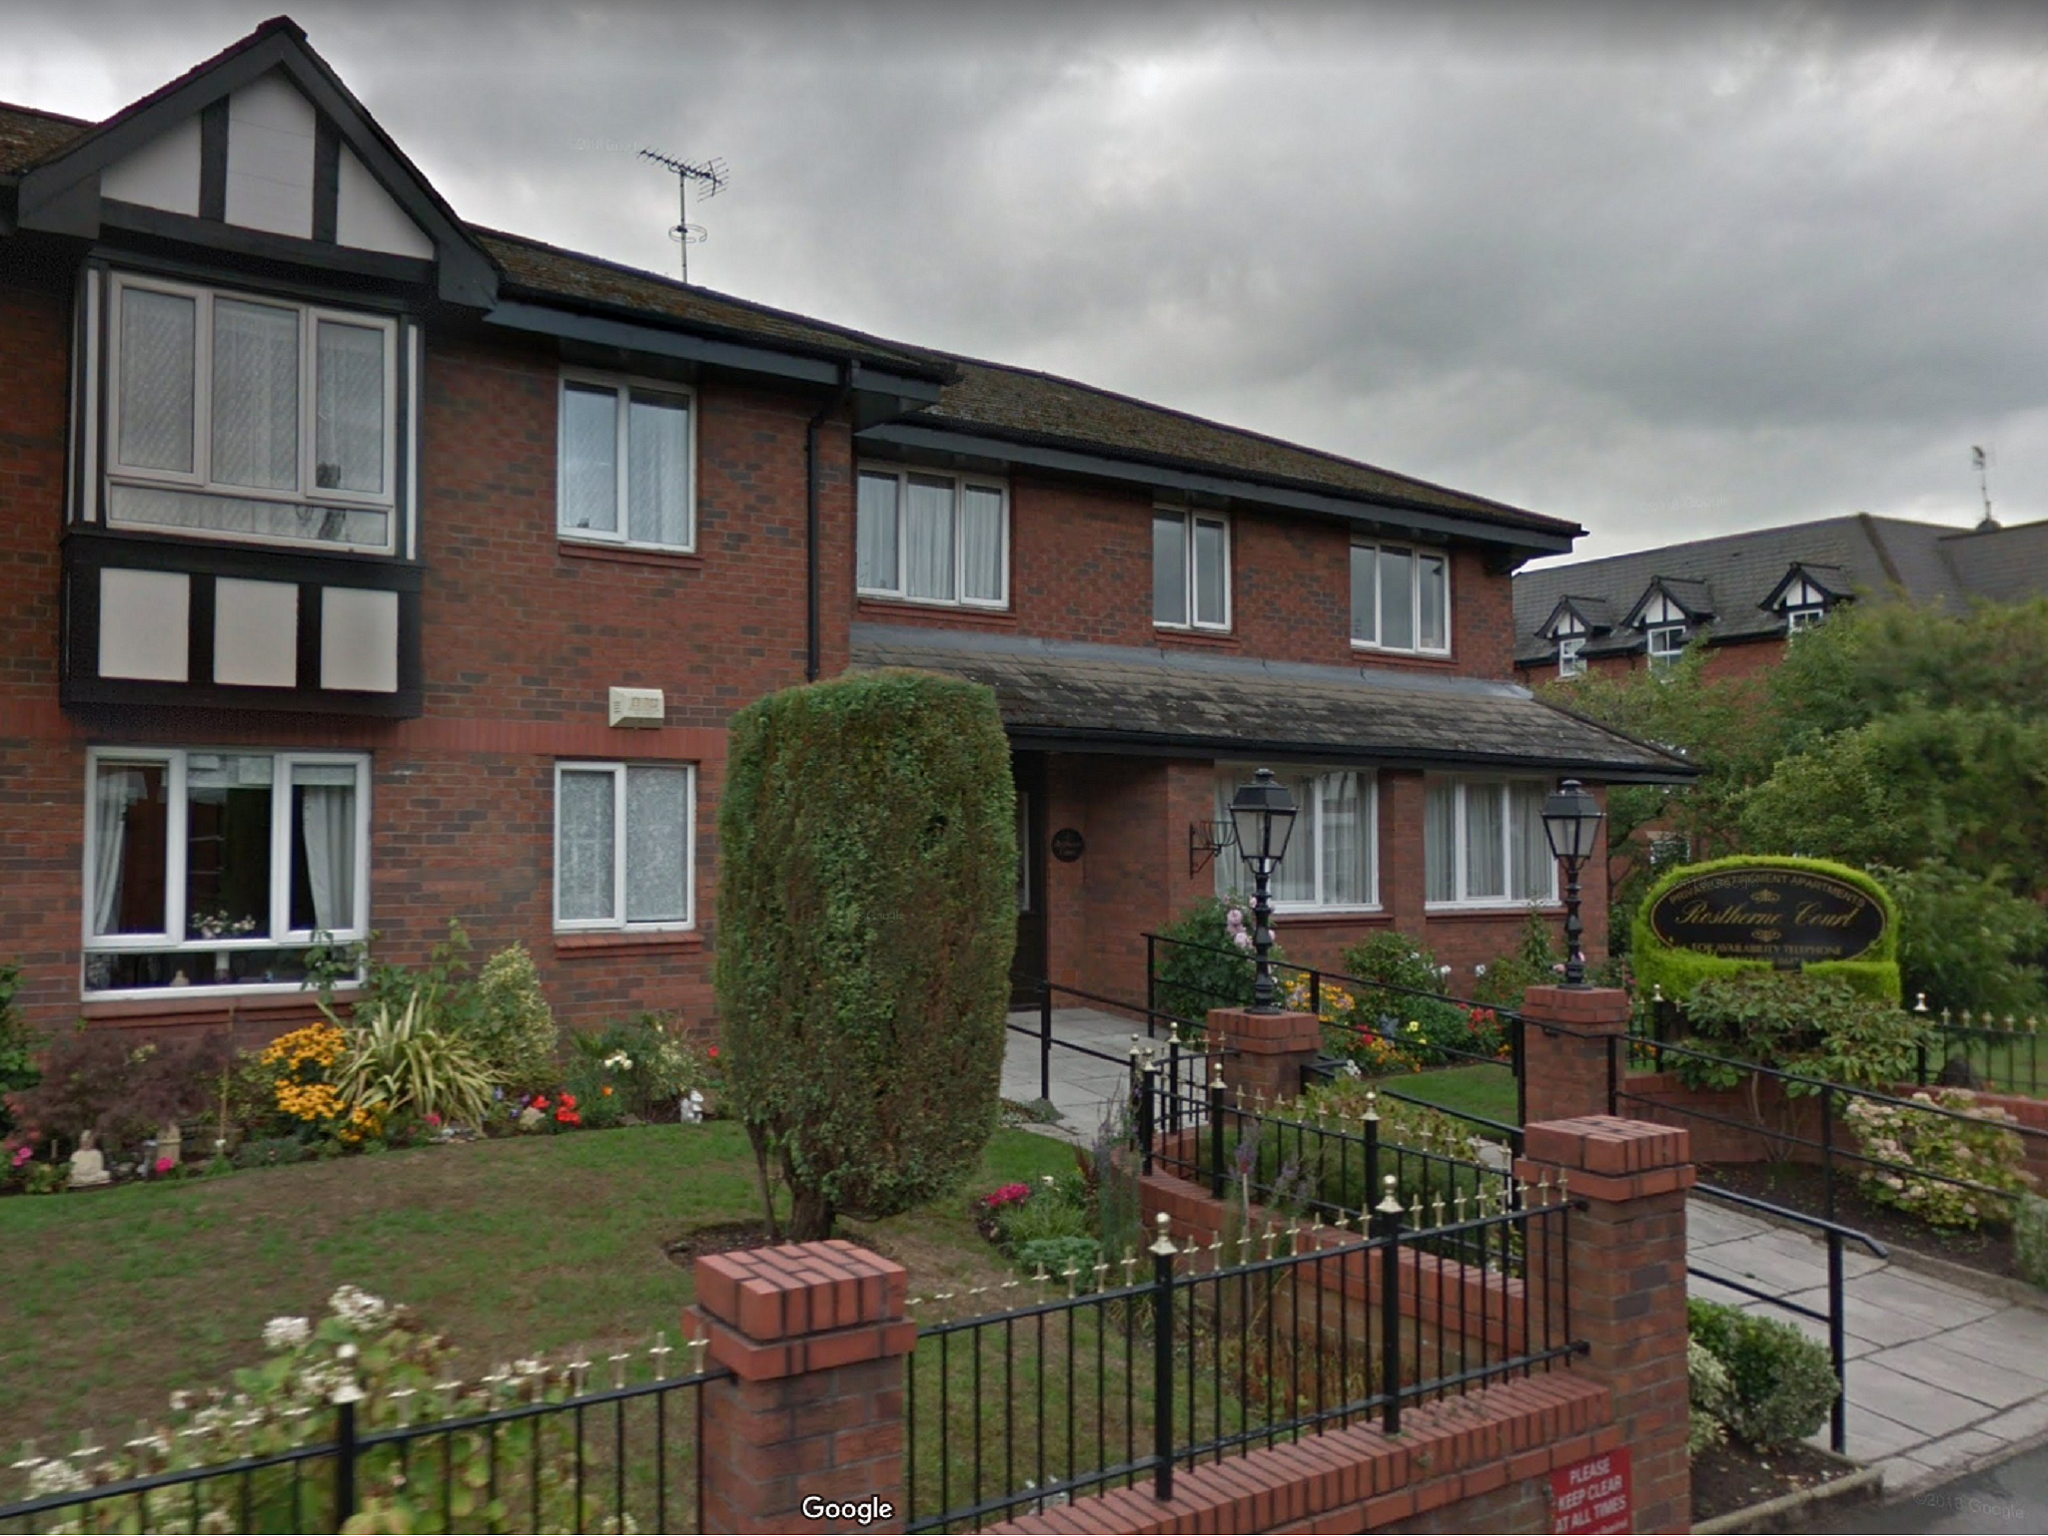 A couple were found dead in an apparent suicide pact at Rostherne Court retirement village in Altrincham, Greater Manchester.